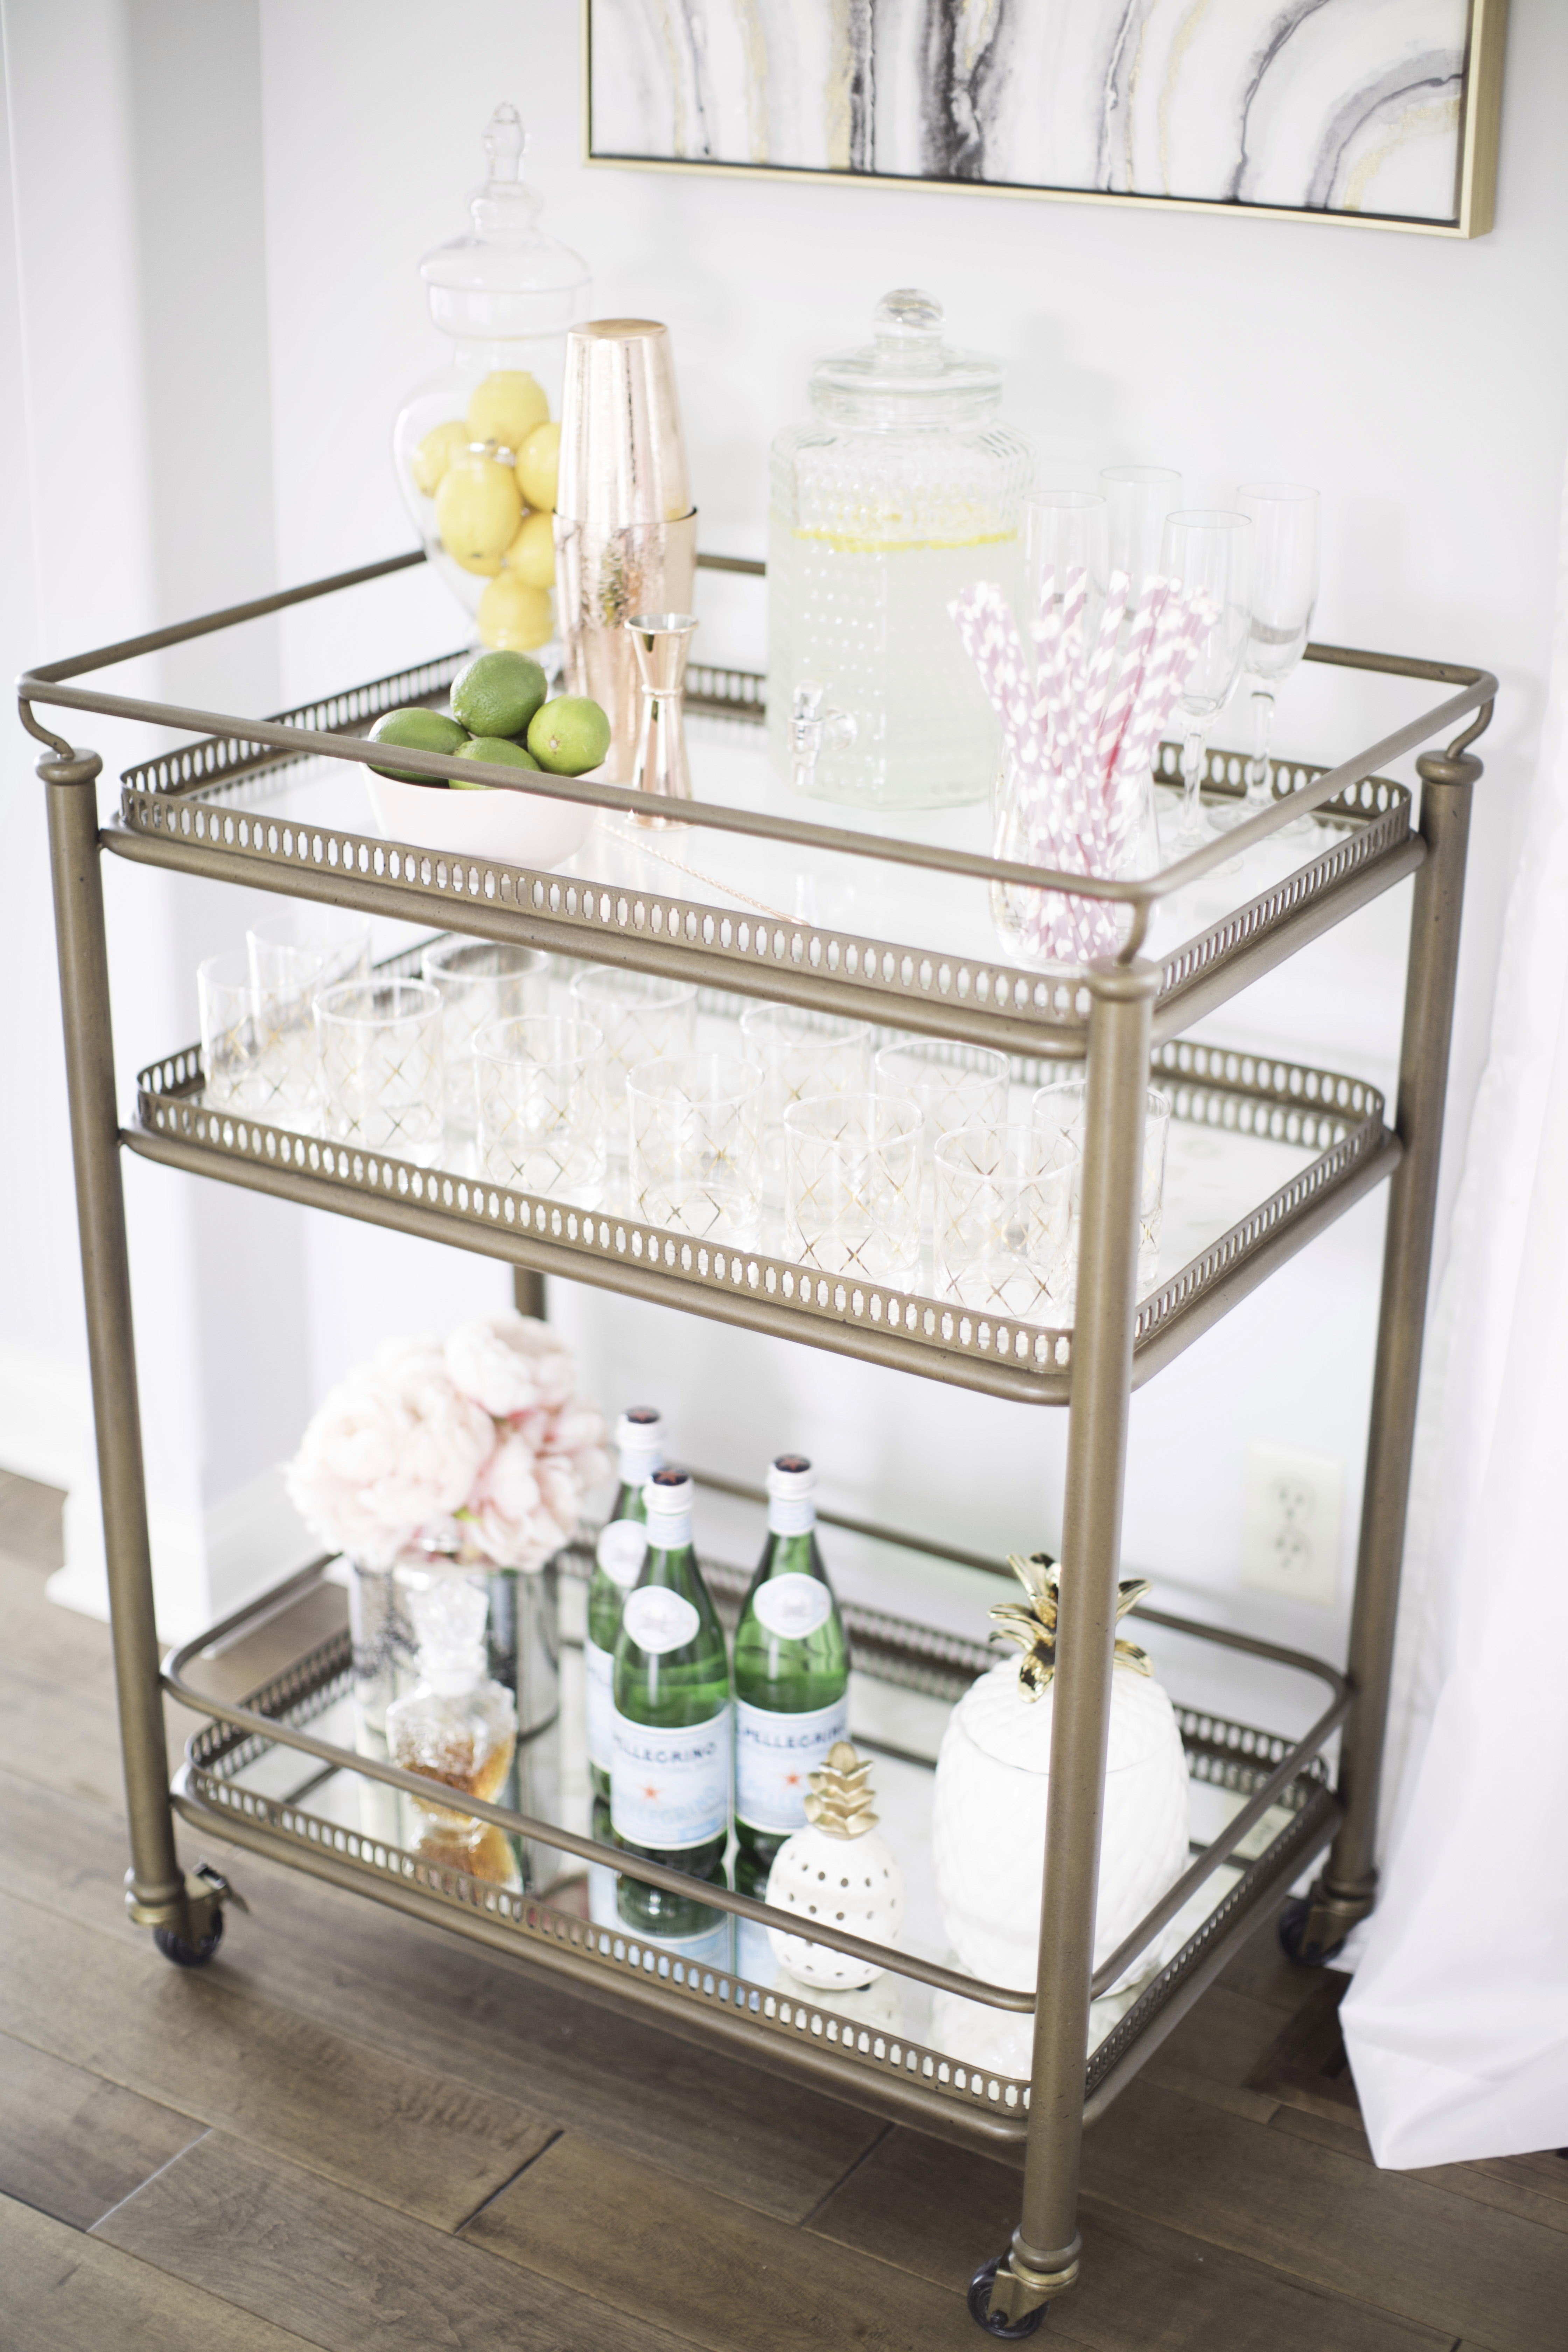 how to style a bar cart from soft surroundings, interior design, bar cart design, bar cart styling idea